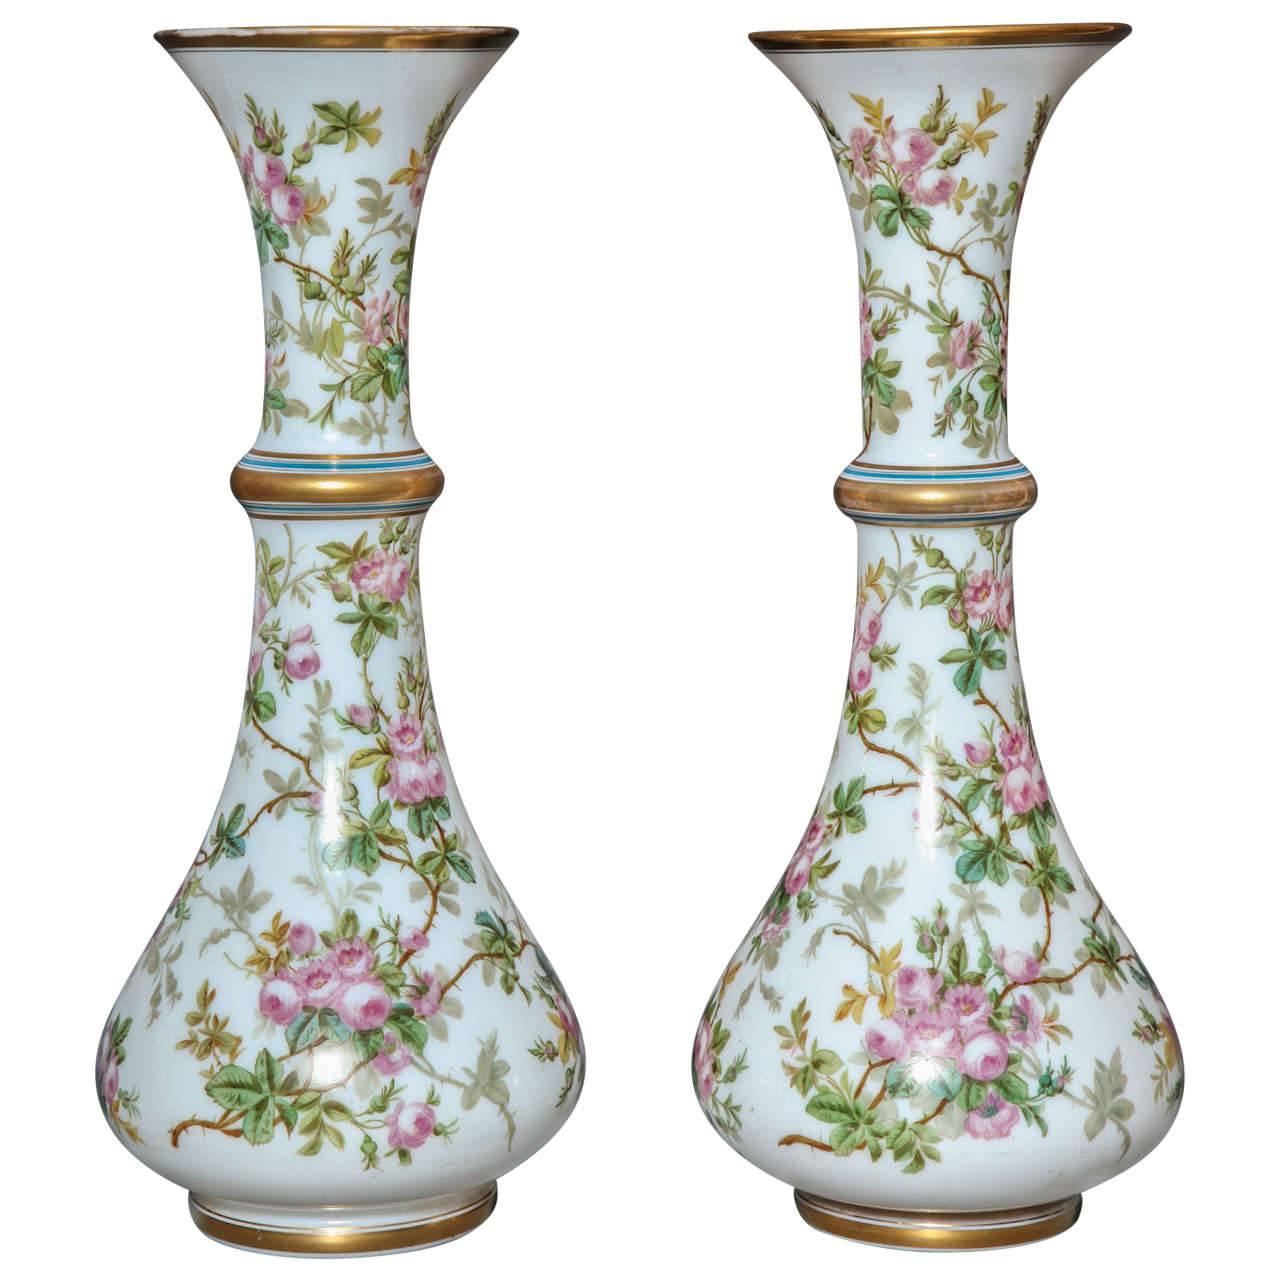 Fine Pair of Antique French Opaque White Opaline Glass Vases